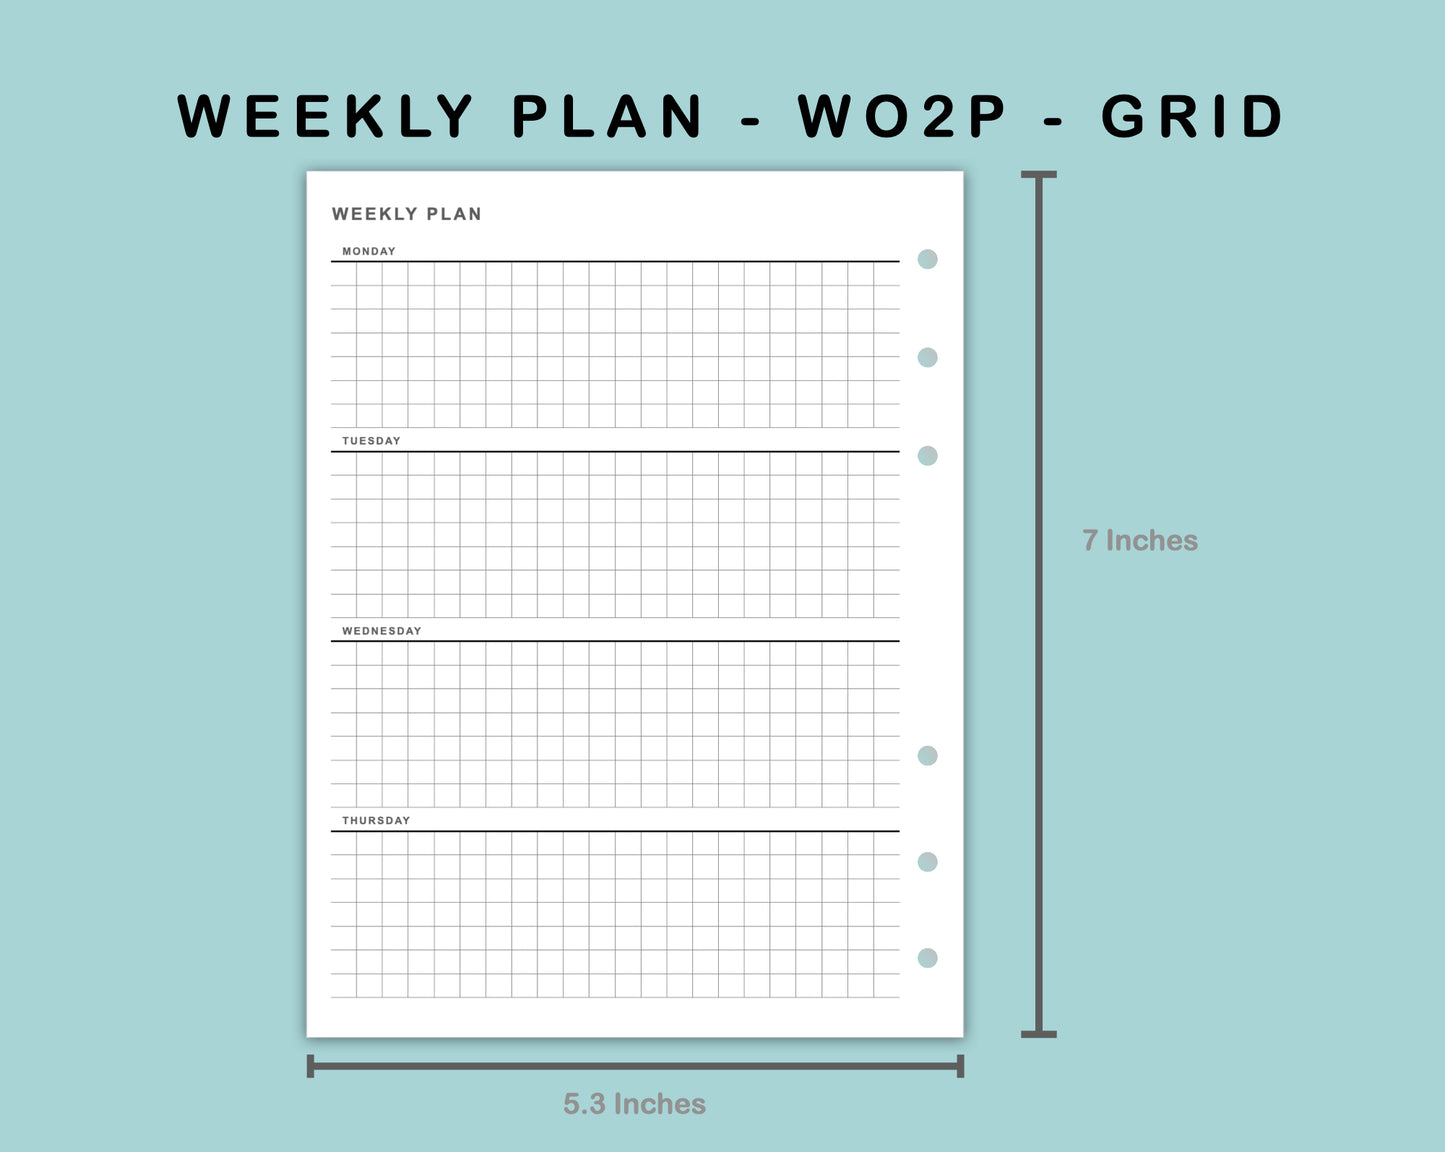 B6 Wide Inserts - Weekly Plan - WO2P - Grid